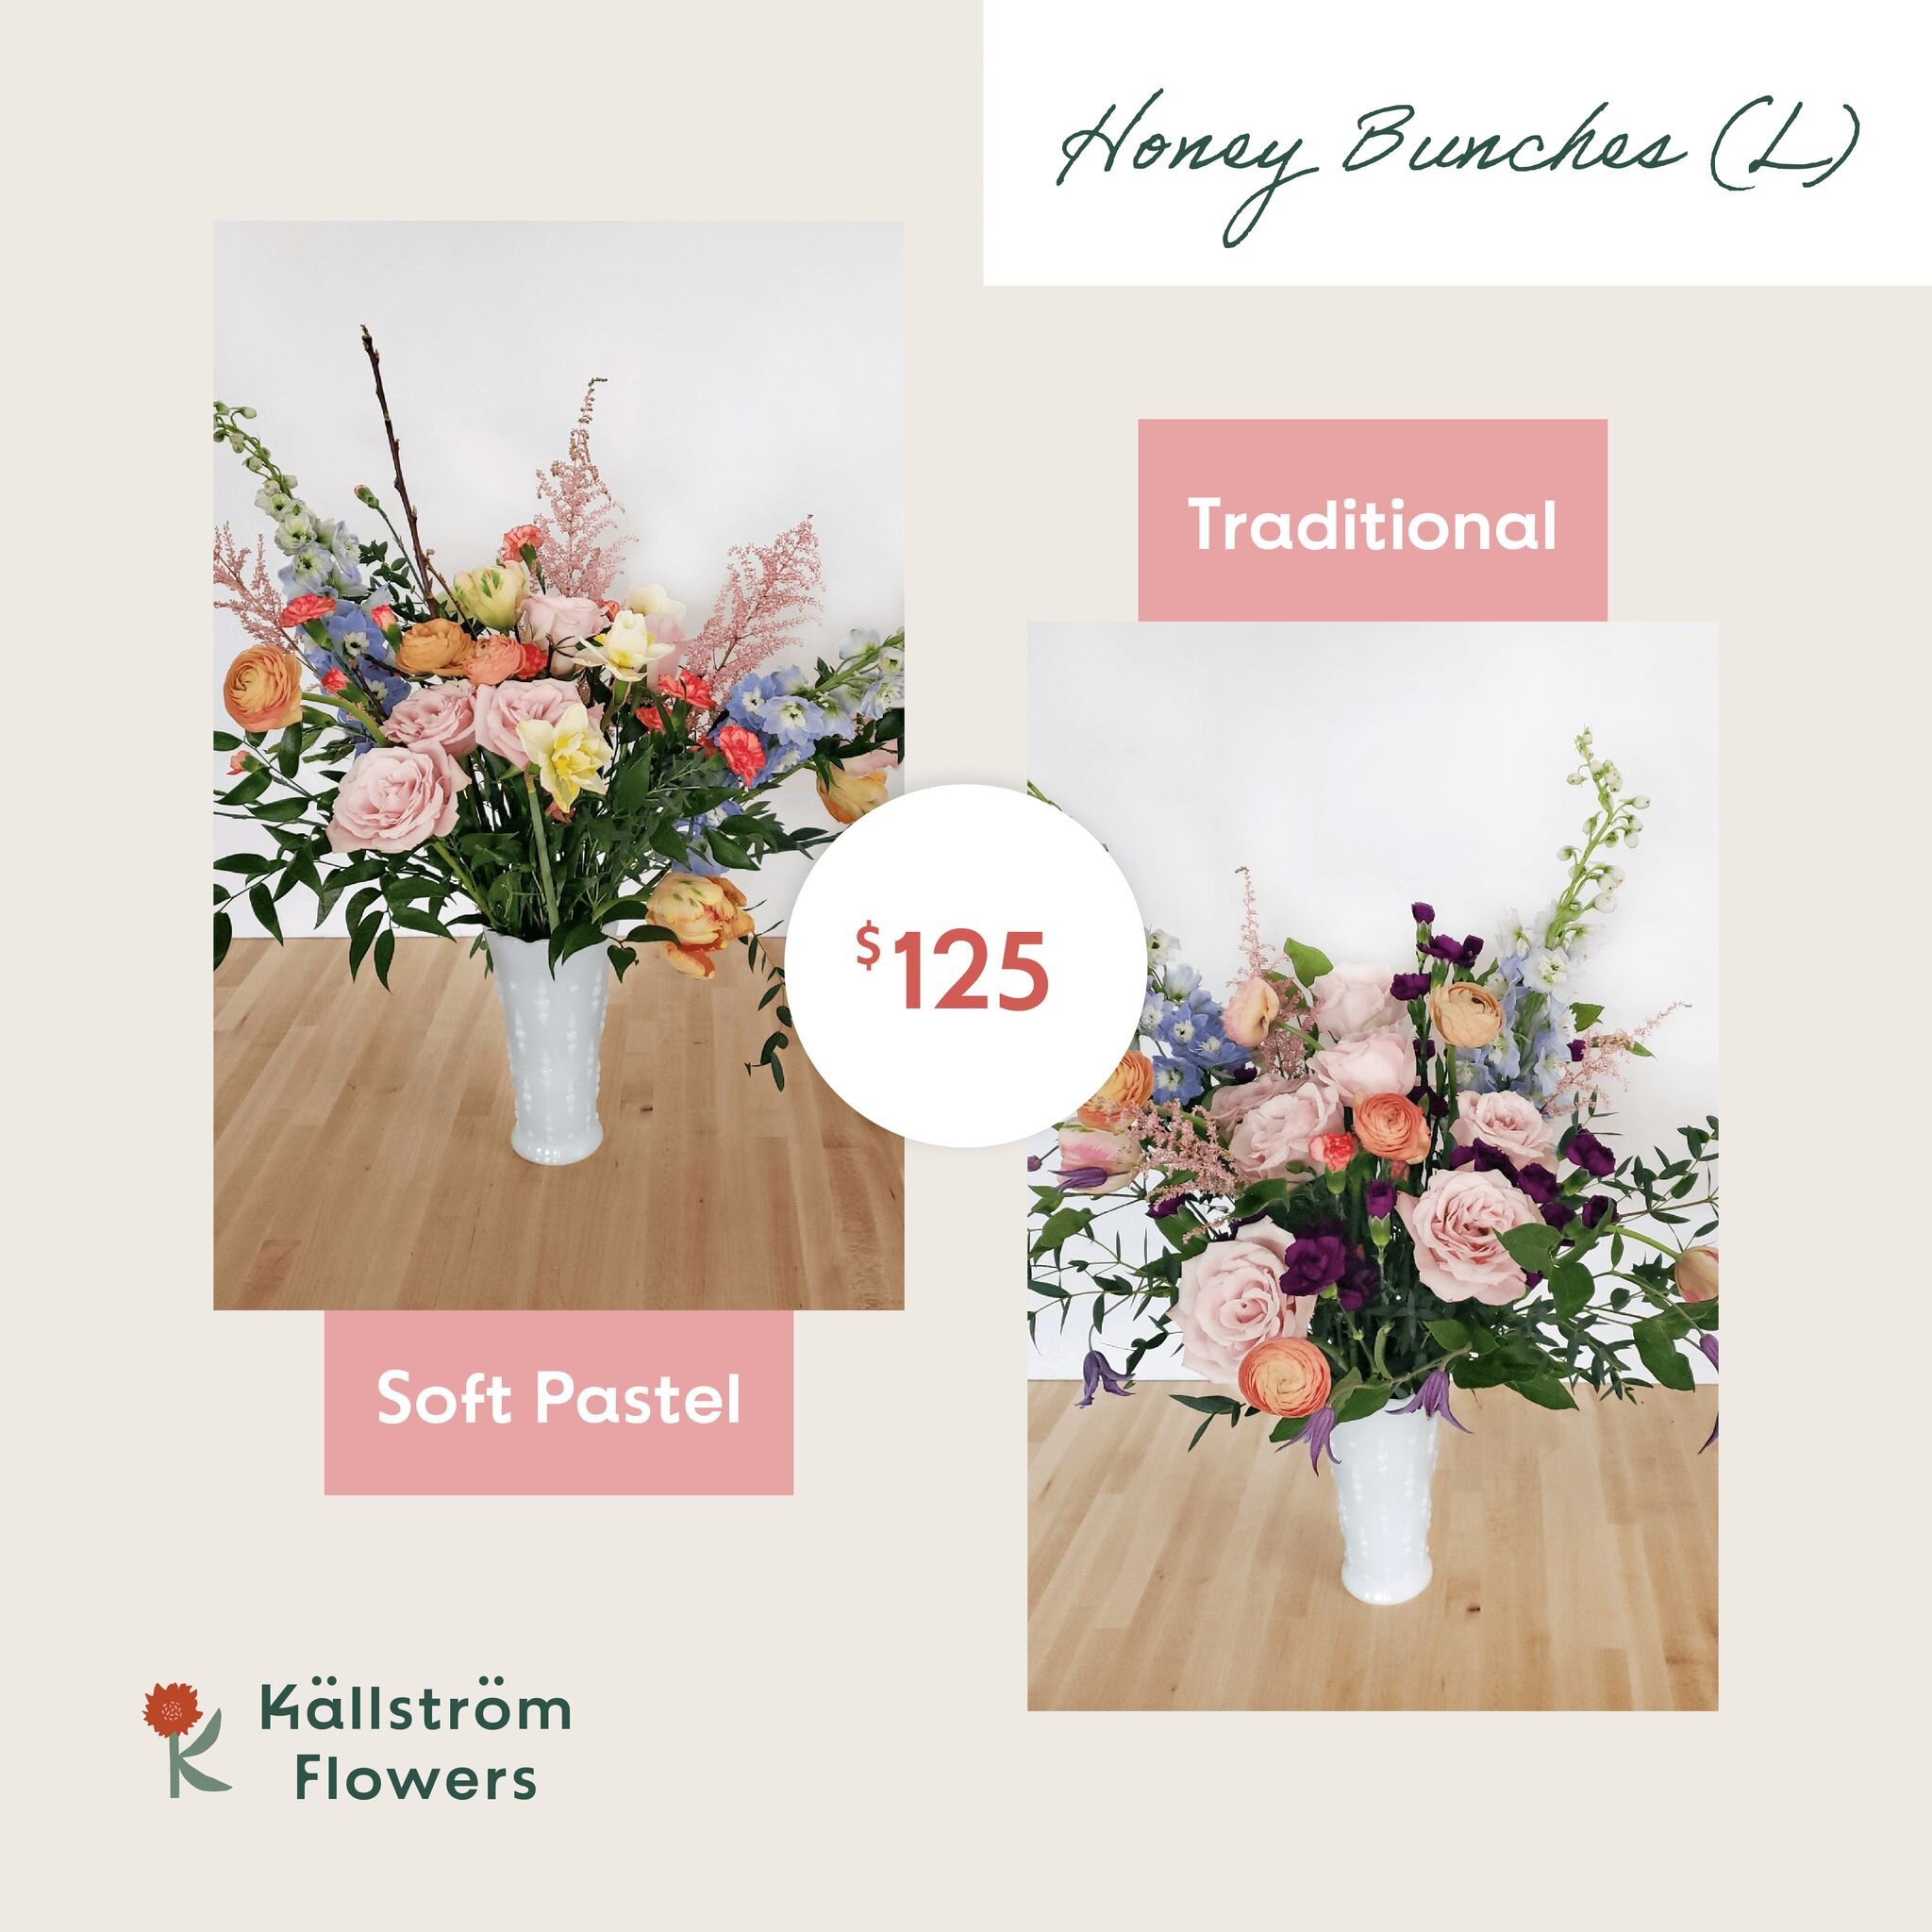 We make ordering flowers for her as simple as possible. 

🌷 Pick her fave color (Pastels or Traditional) 
💐 Pick a bouquet size (Small, Medium or Large)
🚗 Select Delivery or Pickup when you add to your cart 
🧑&zwj;💻 Checkout on our website: www.